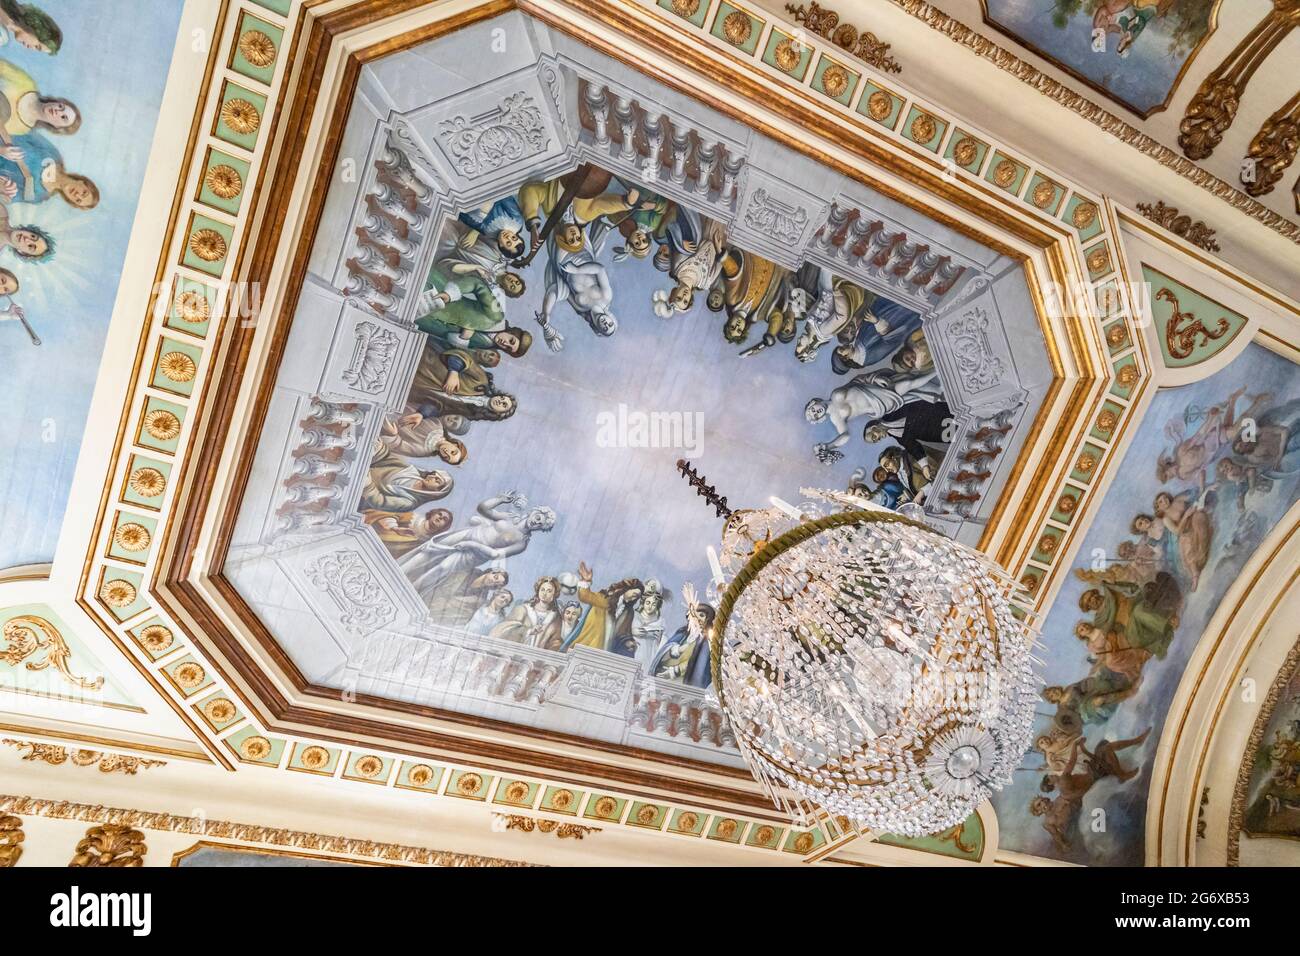 Queluz Palace, Sintra Municipality, Portugal.   Painted ceiling showing the Royal Family at a musical soiree in the Sala dos Embaixadores, or Hall of Stock Photo